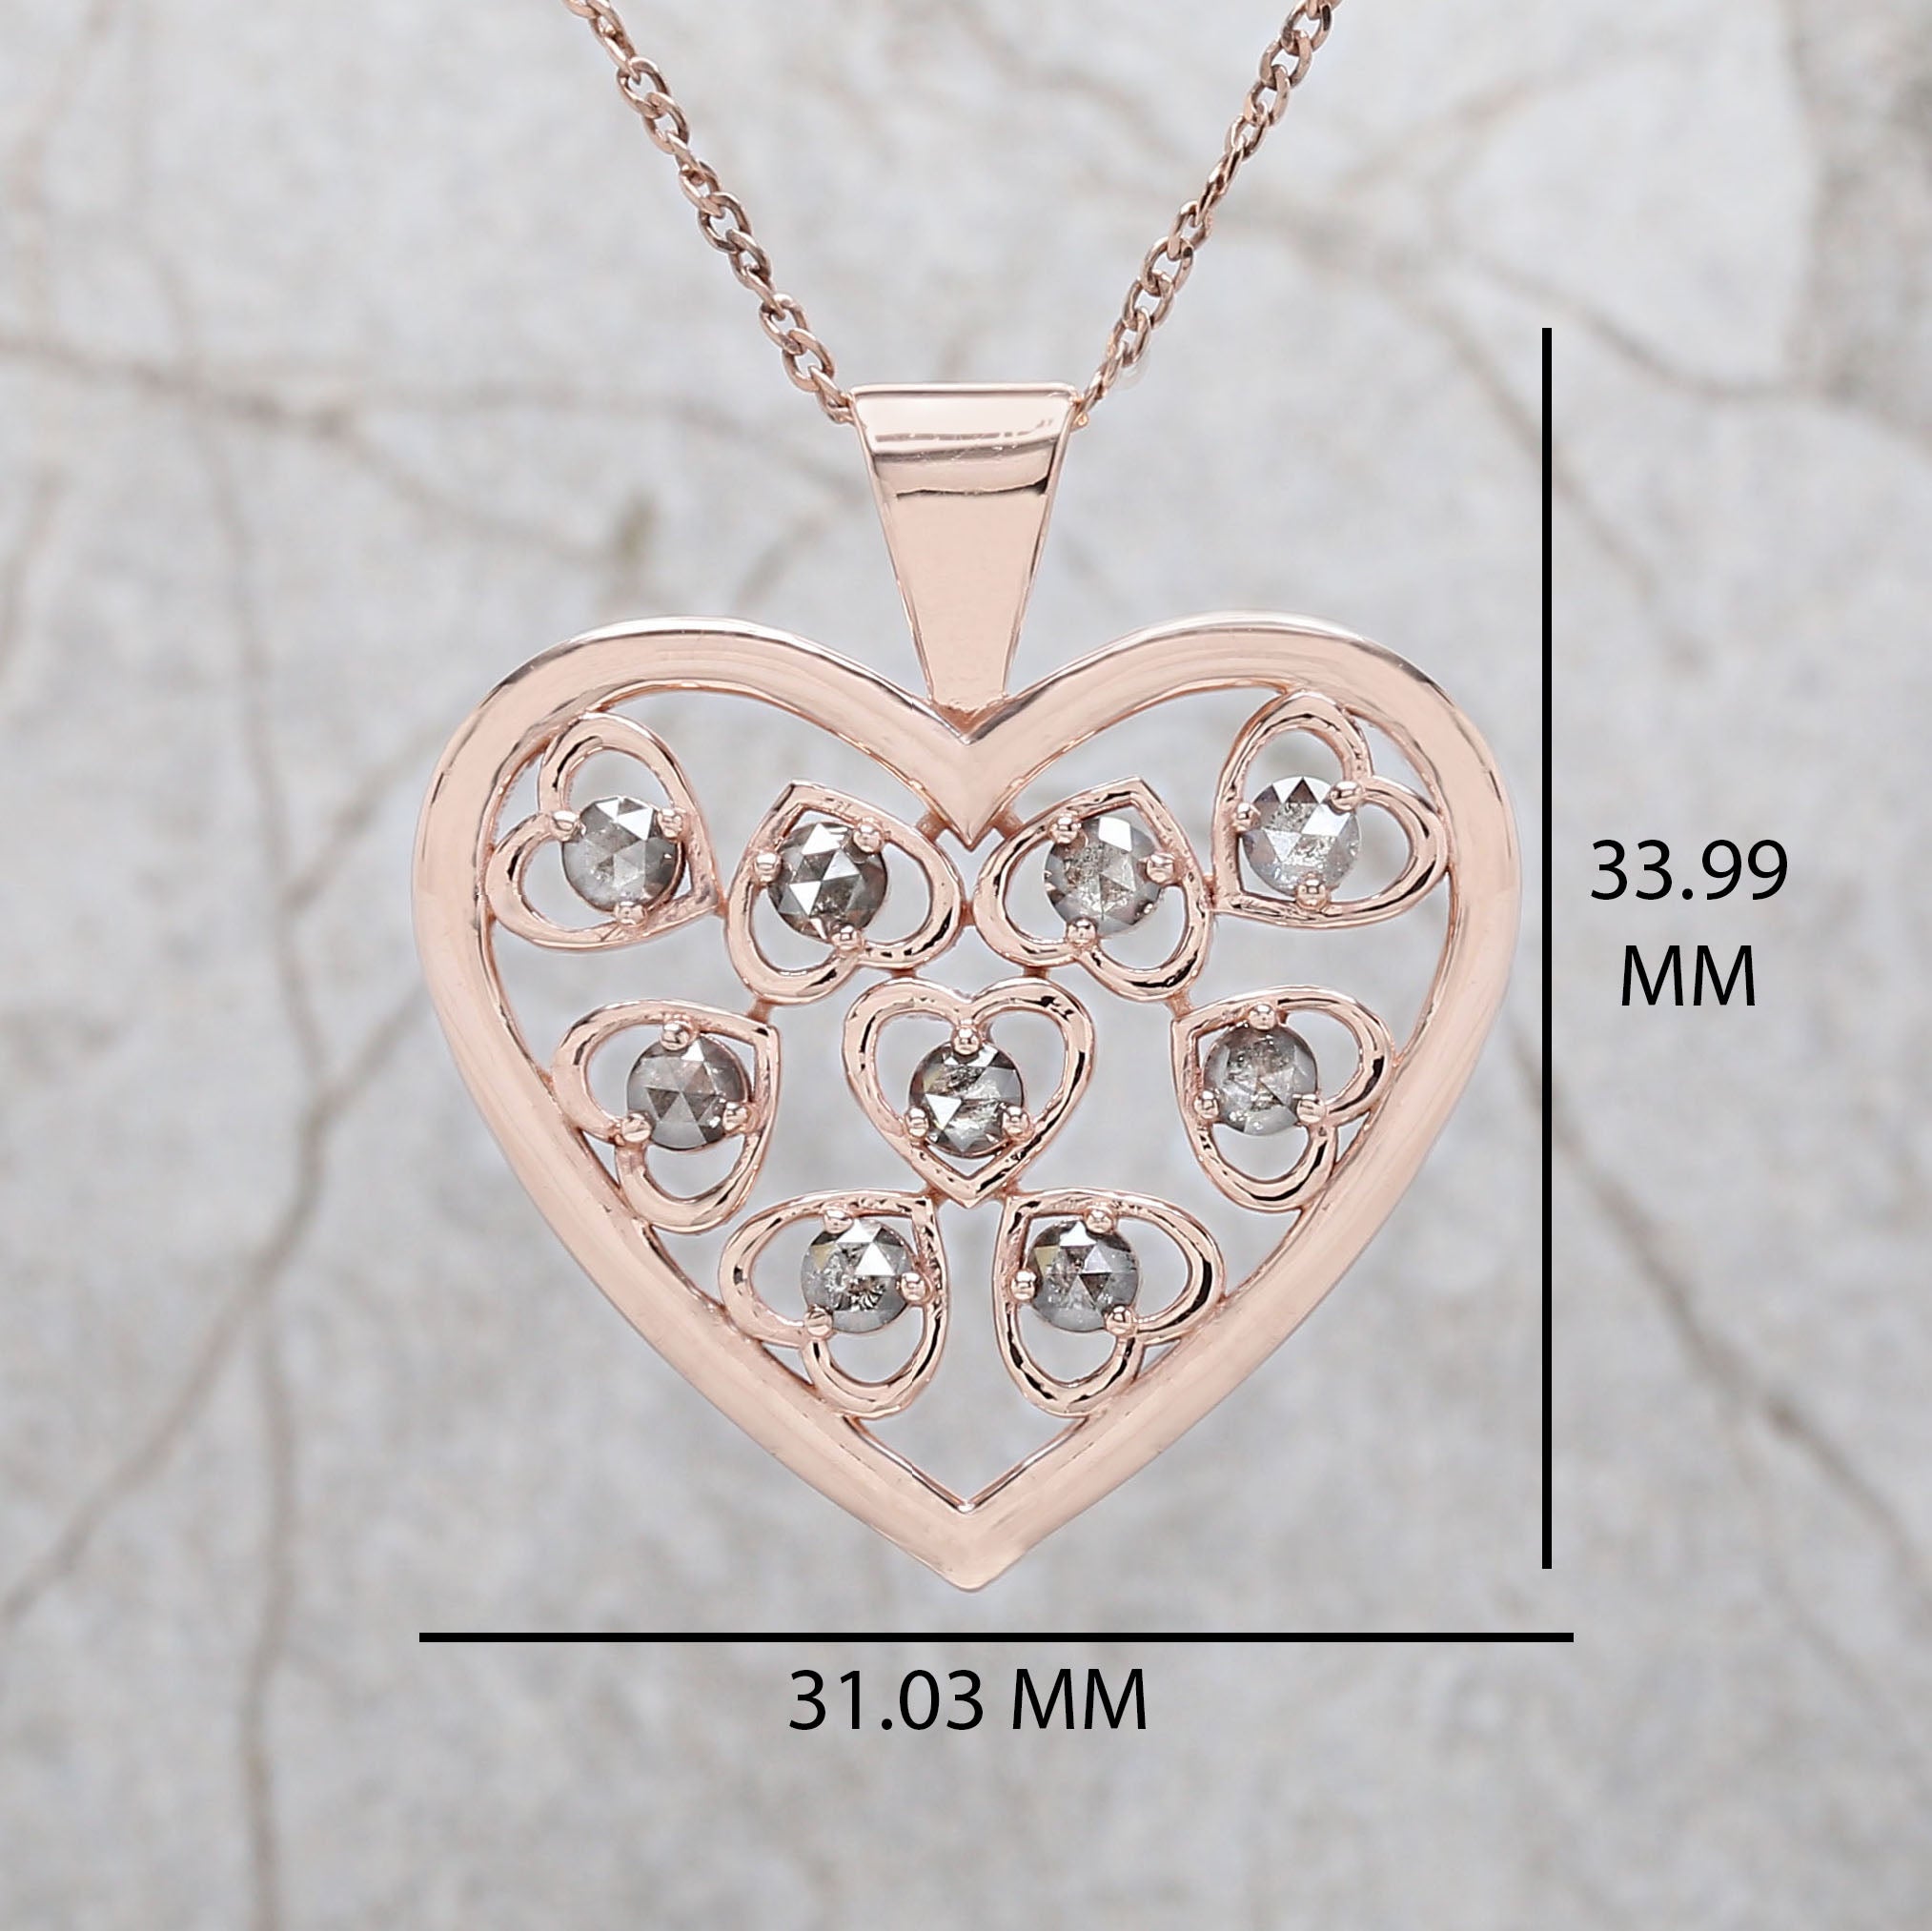 Round Rose Cut Salt And Pepper Diamond Pendant, Unique Diamond Pendant, Dangling Diamond Pendant, No Chain Including Only Pendant KDL2404